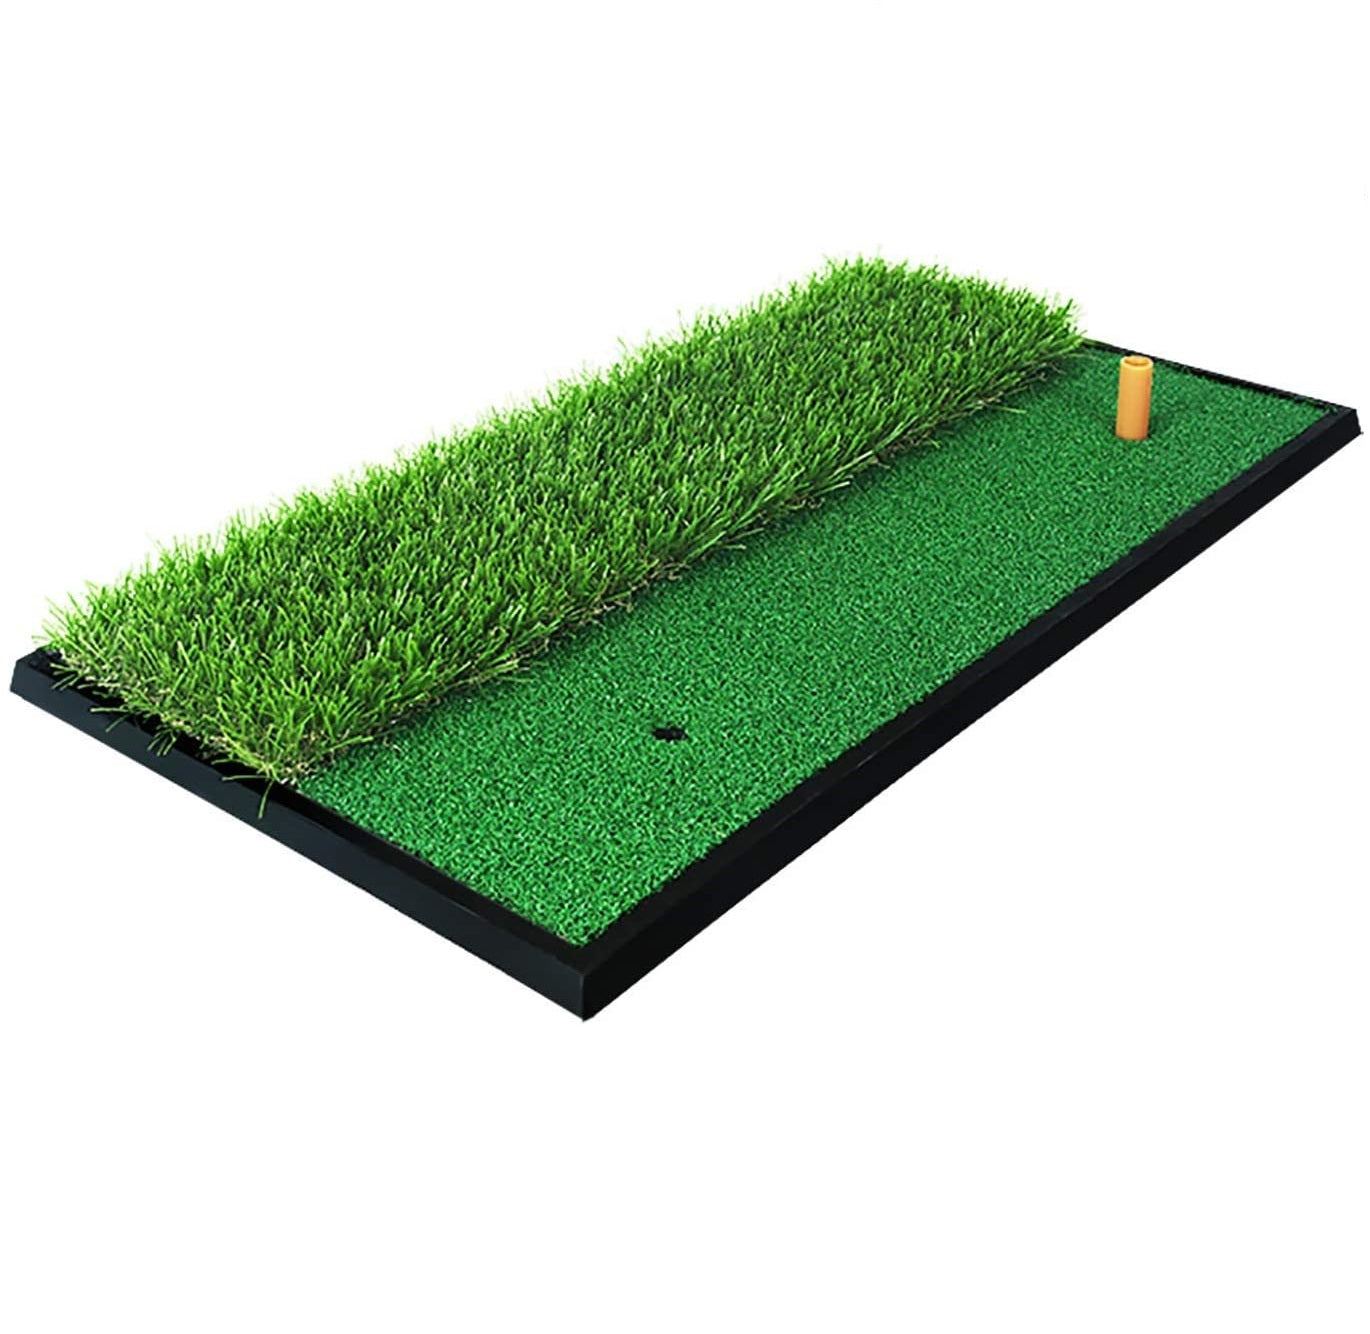 GolfBasic Golf Turf Practice DOUBLE GRASS Mat for Driving Hitting Chipping